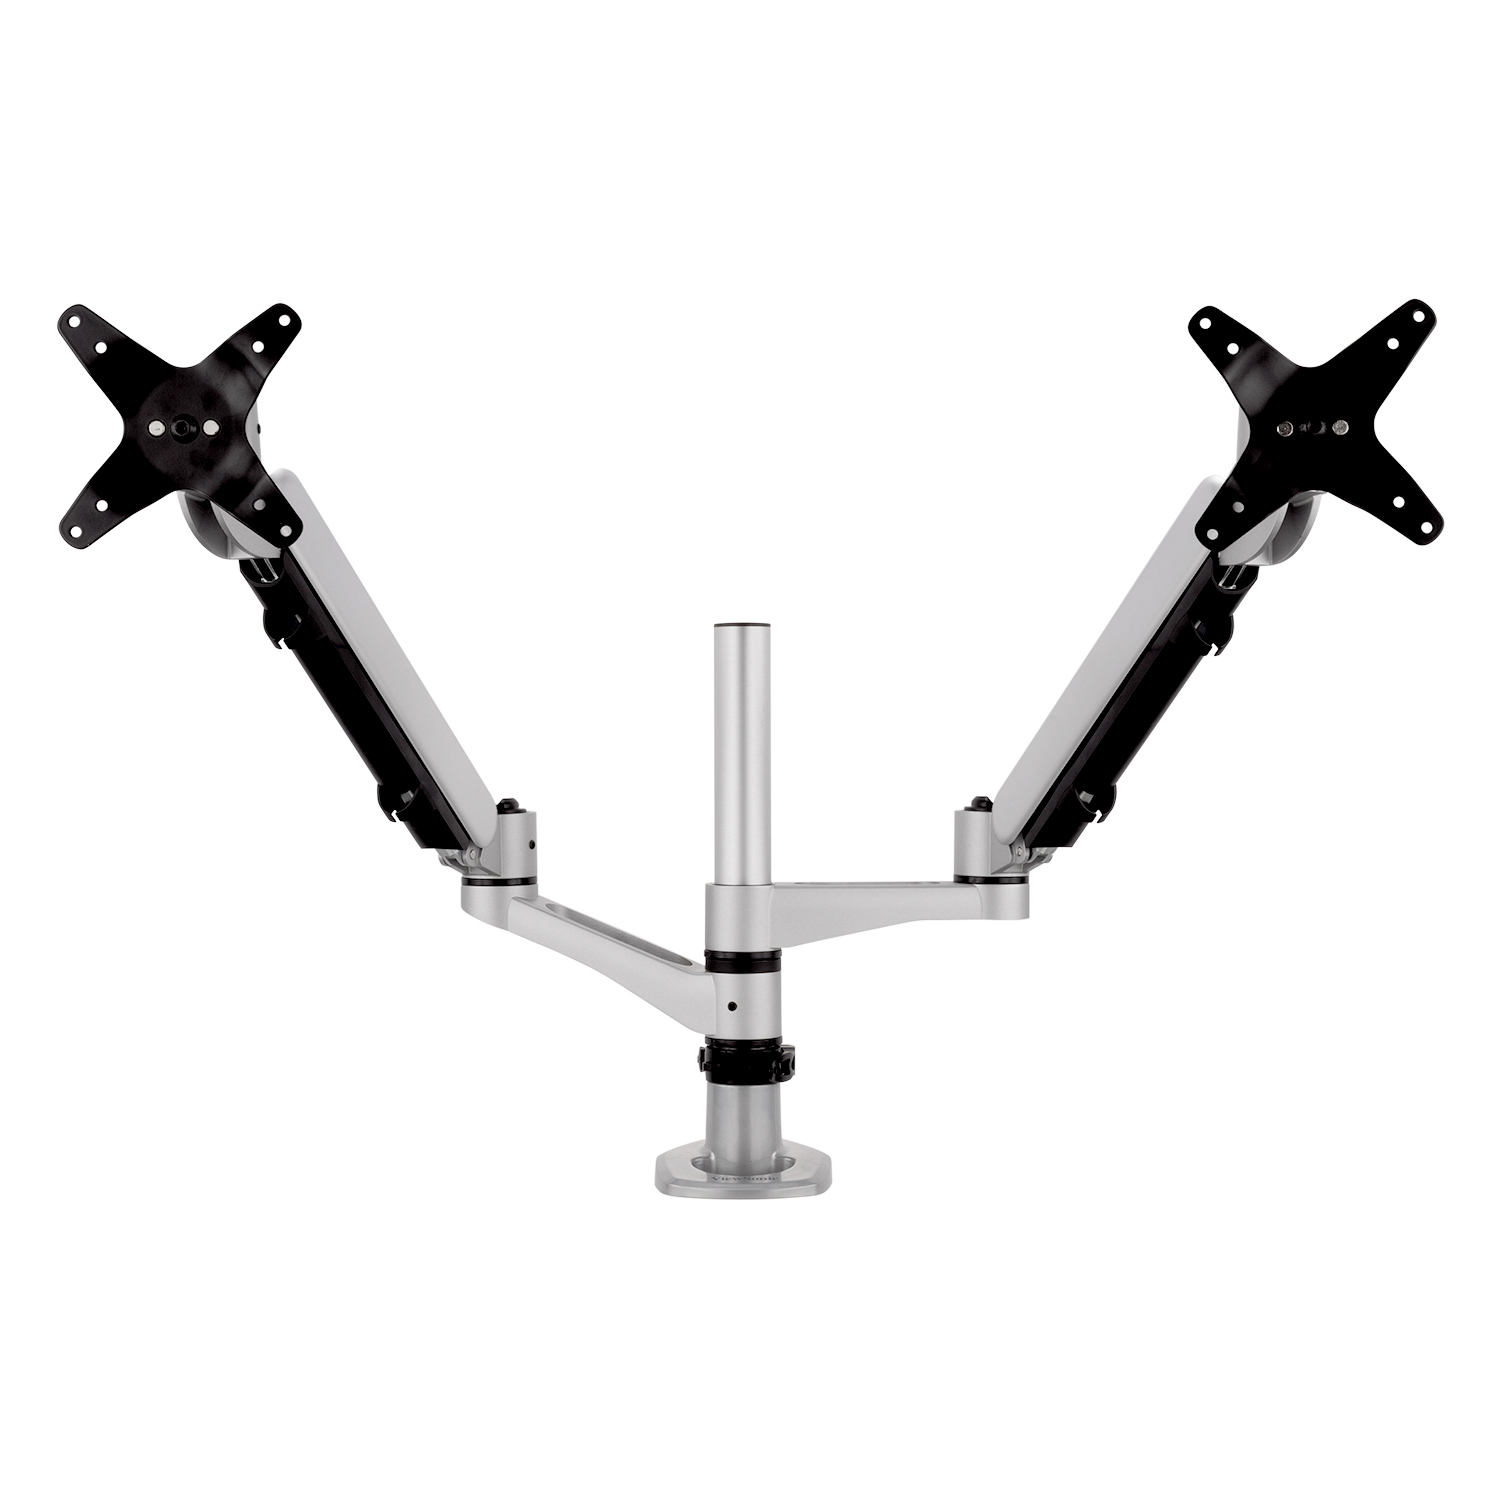 ViewSonic - Mounting kit - for 2 LCD displays (adjustable arm) - screen size: up to 27